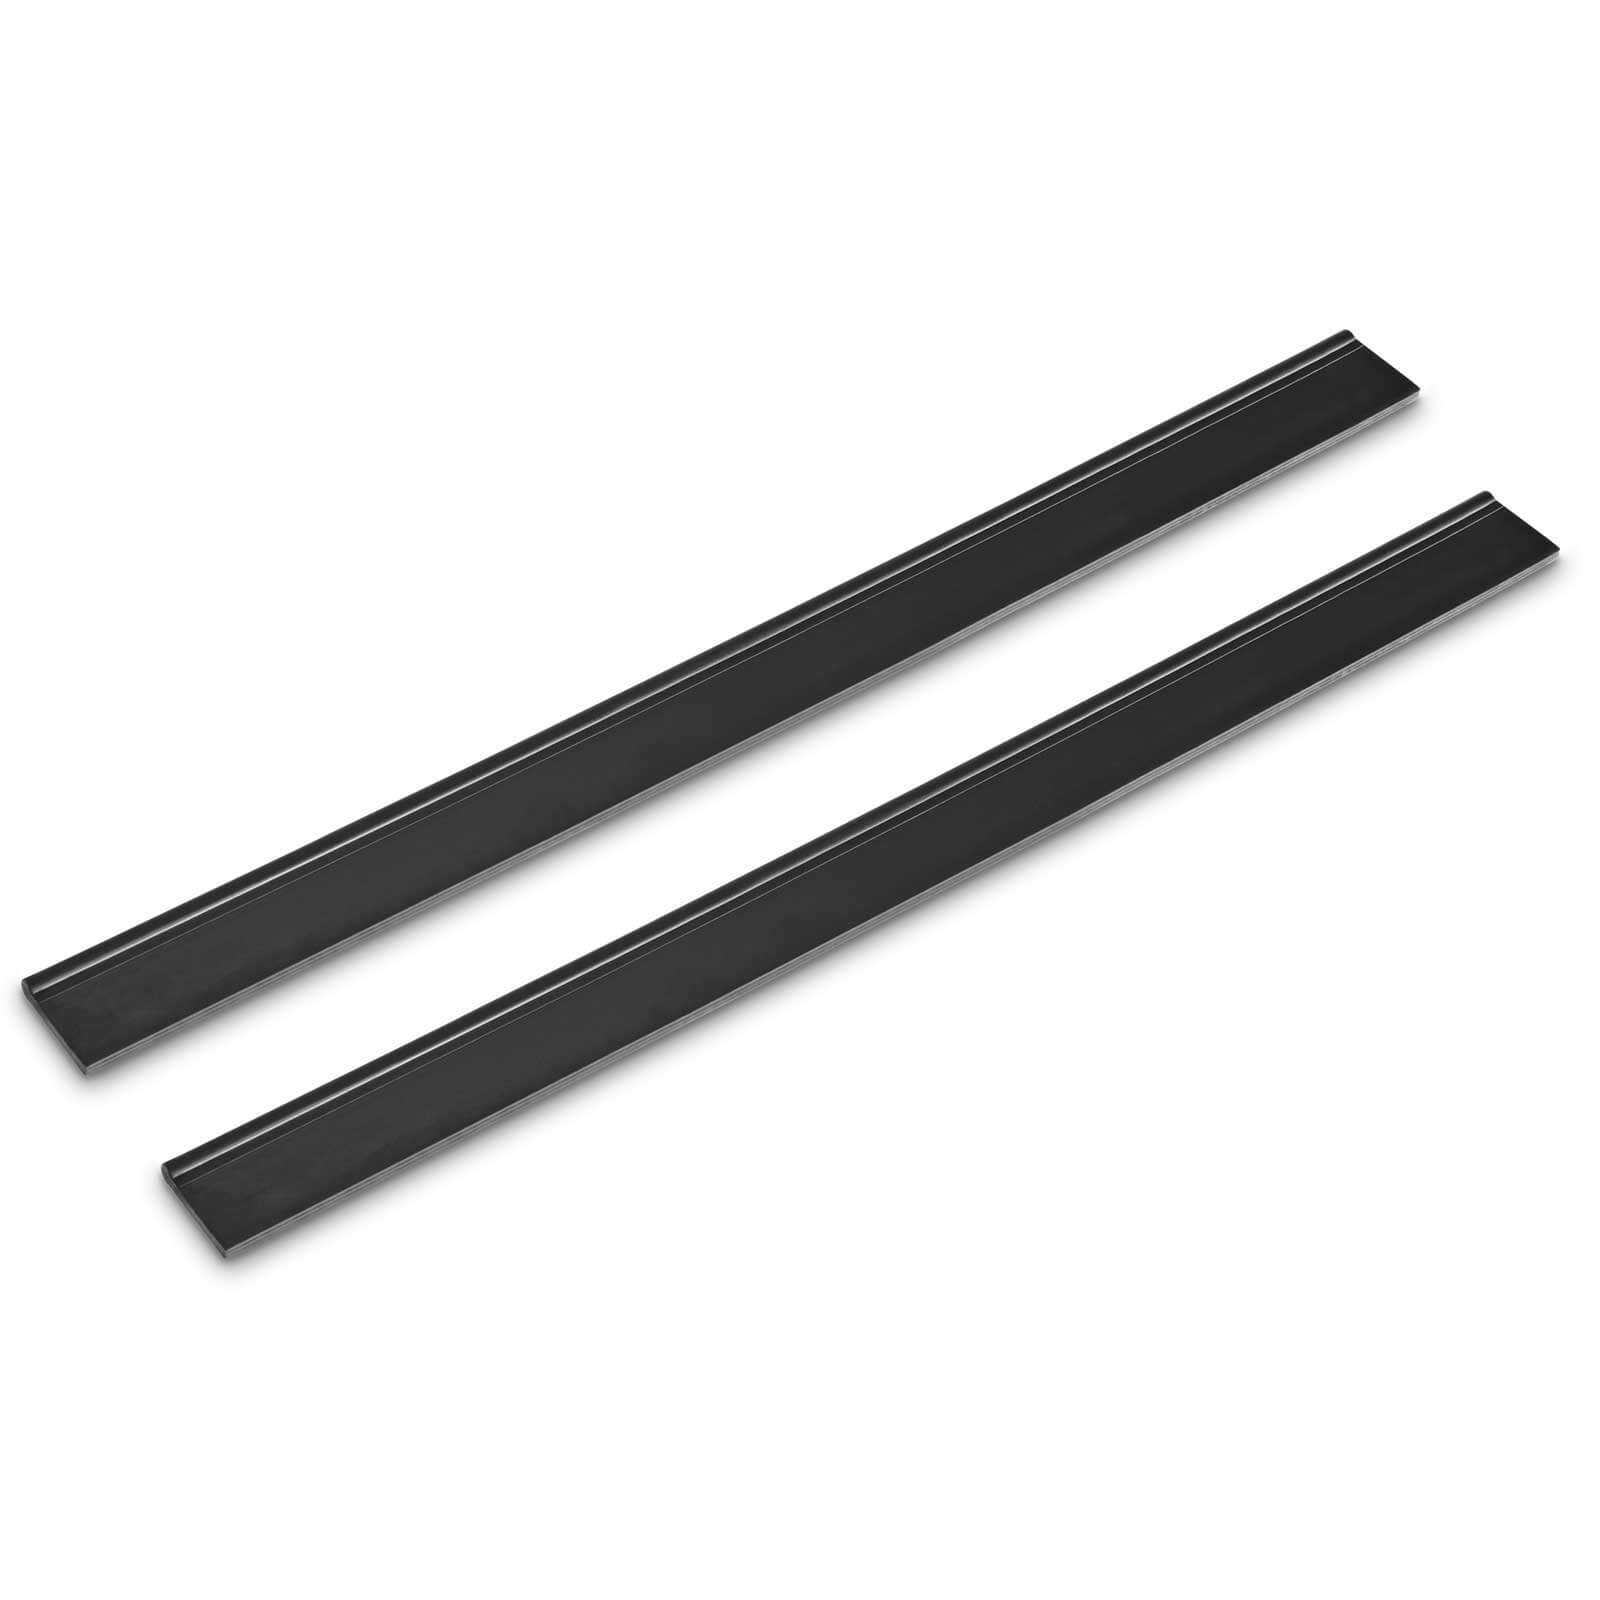 Image of Karcher Suction Lips 280mm for WV 2 - 5 Window Vacs Pack of 2